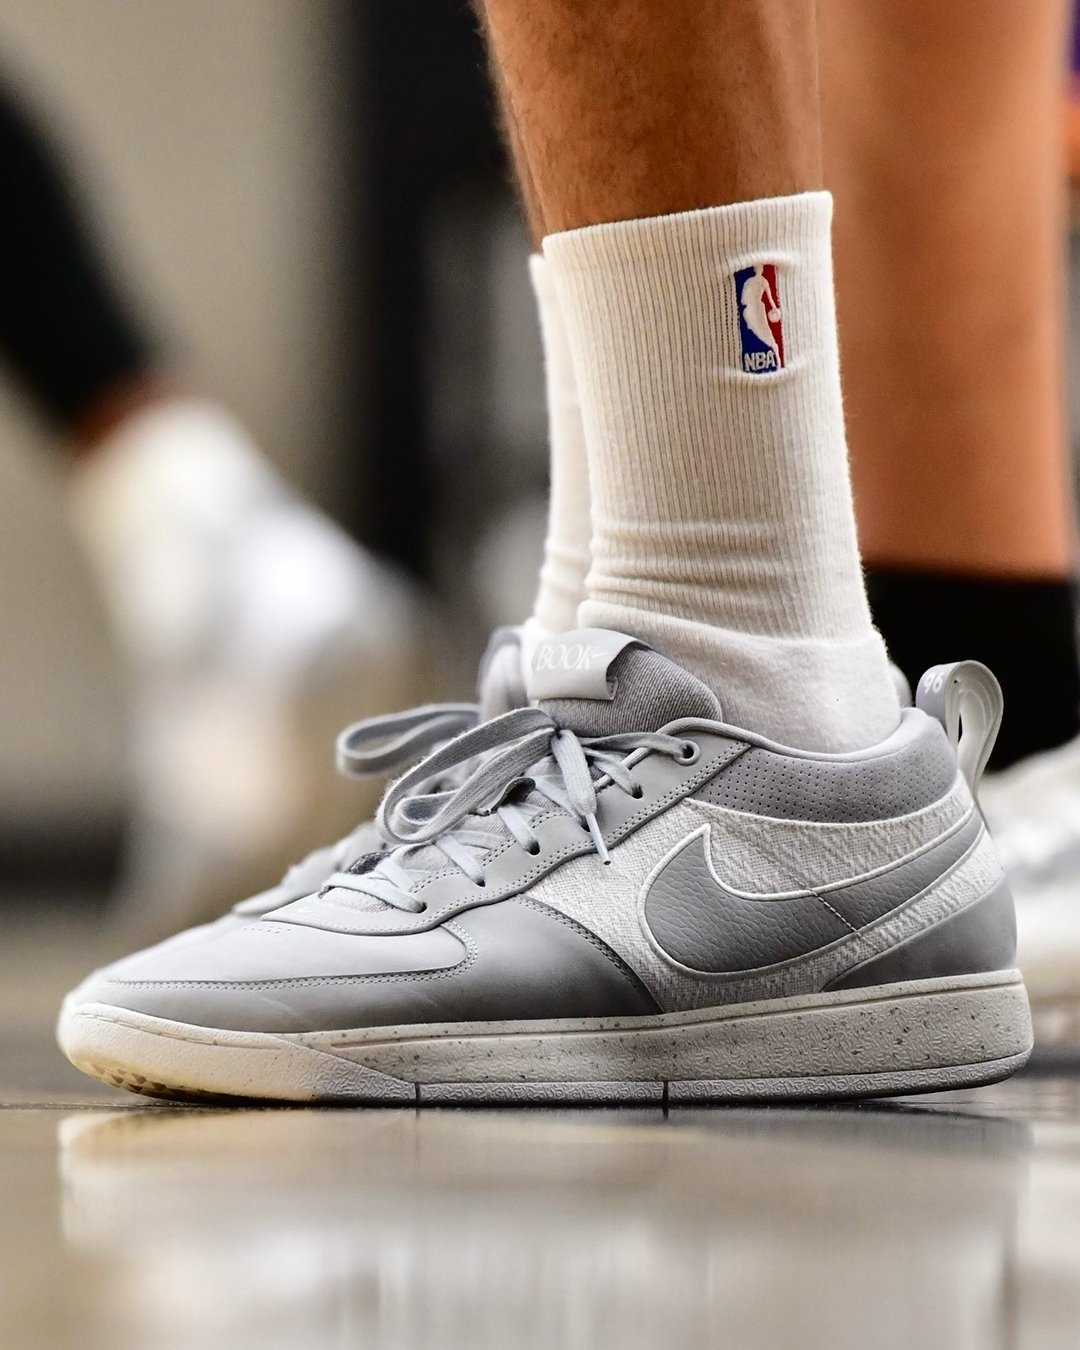 Devin Booker in the nike air force 1 sand springs water bill "Cool Grey"